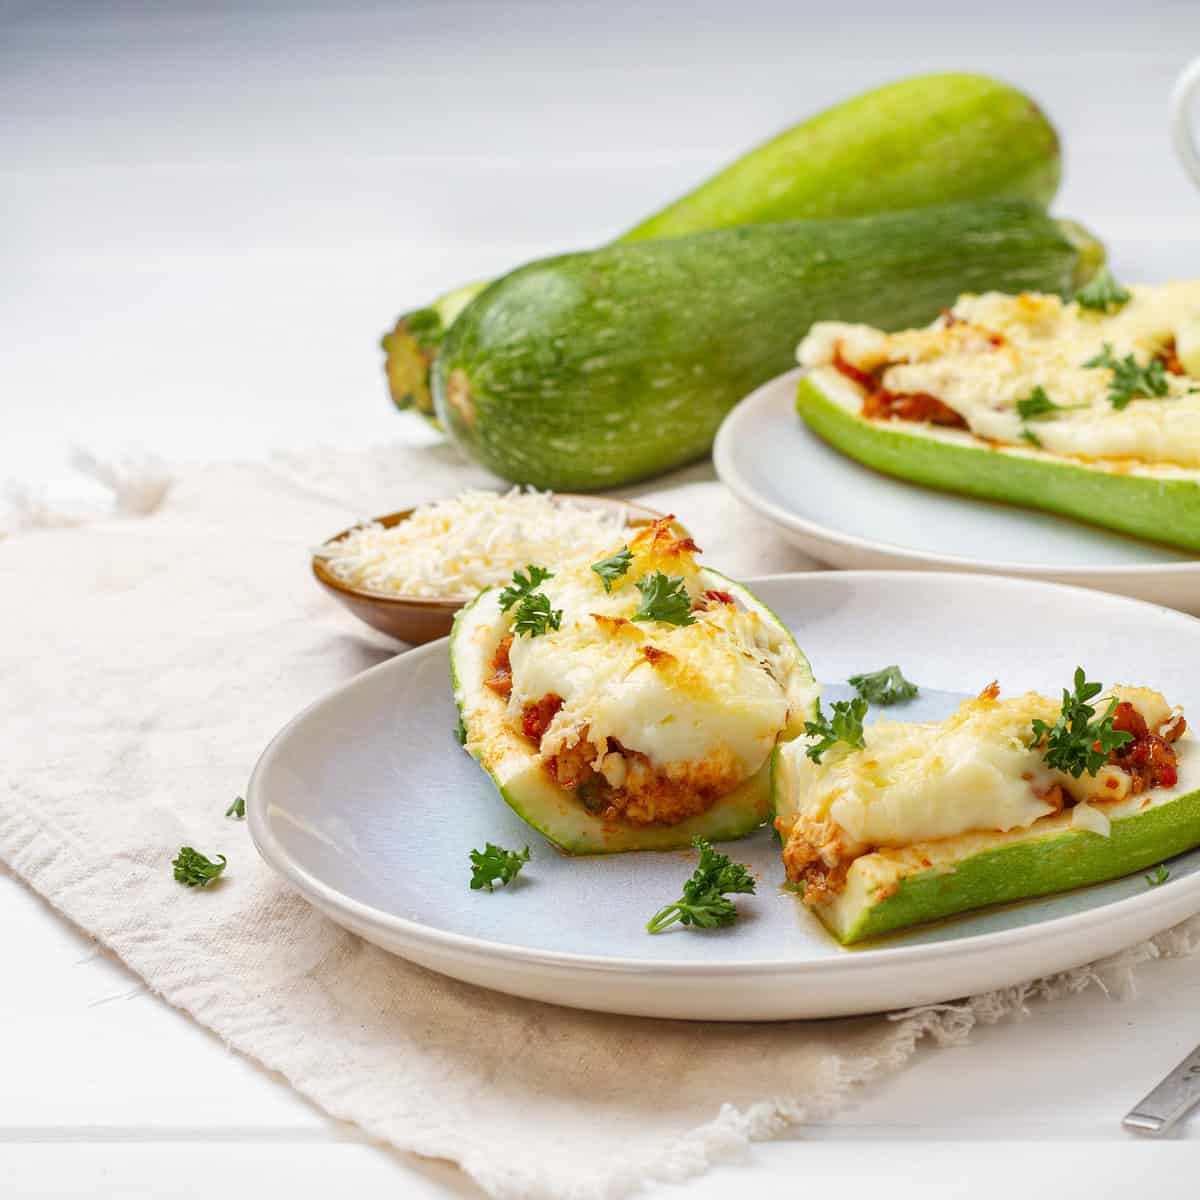 Zucchini Boats served in plates with Zucchini